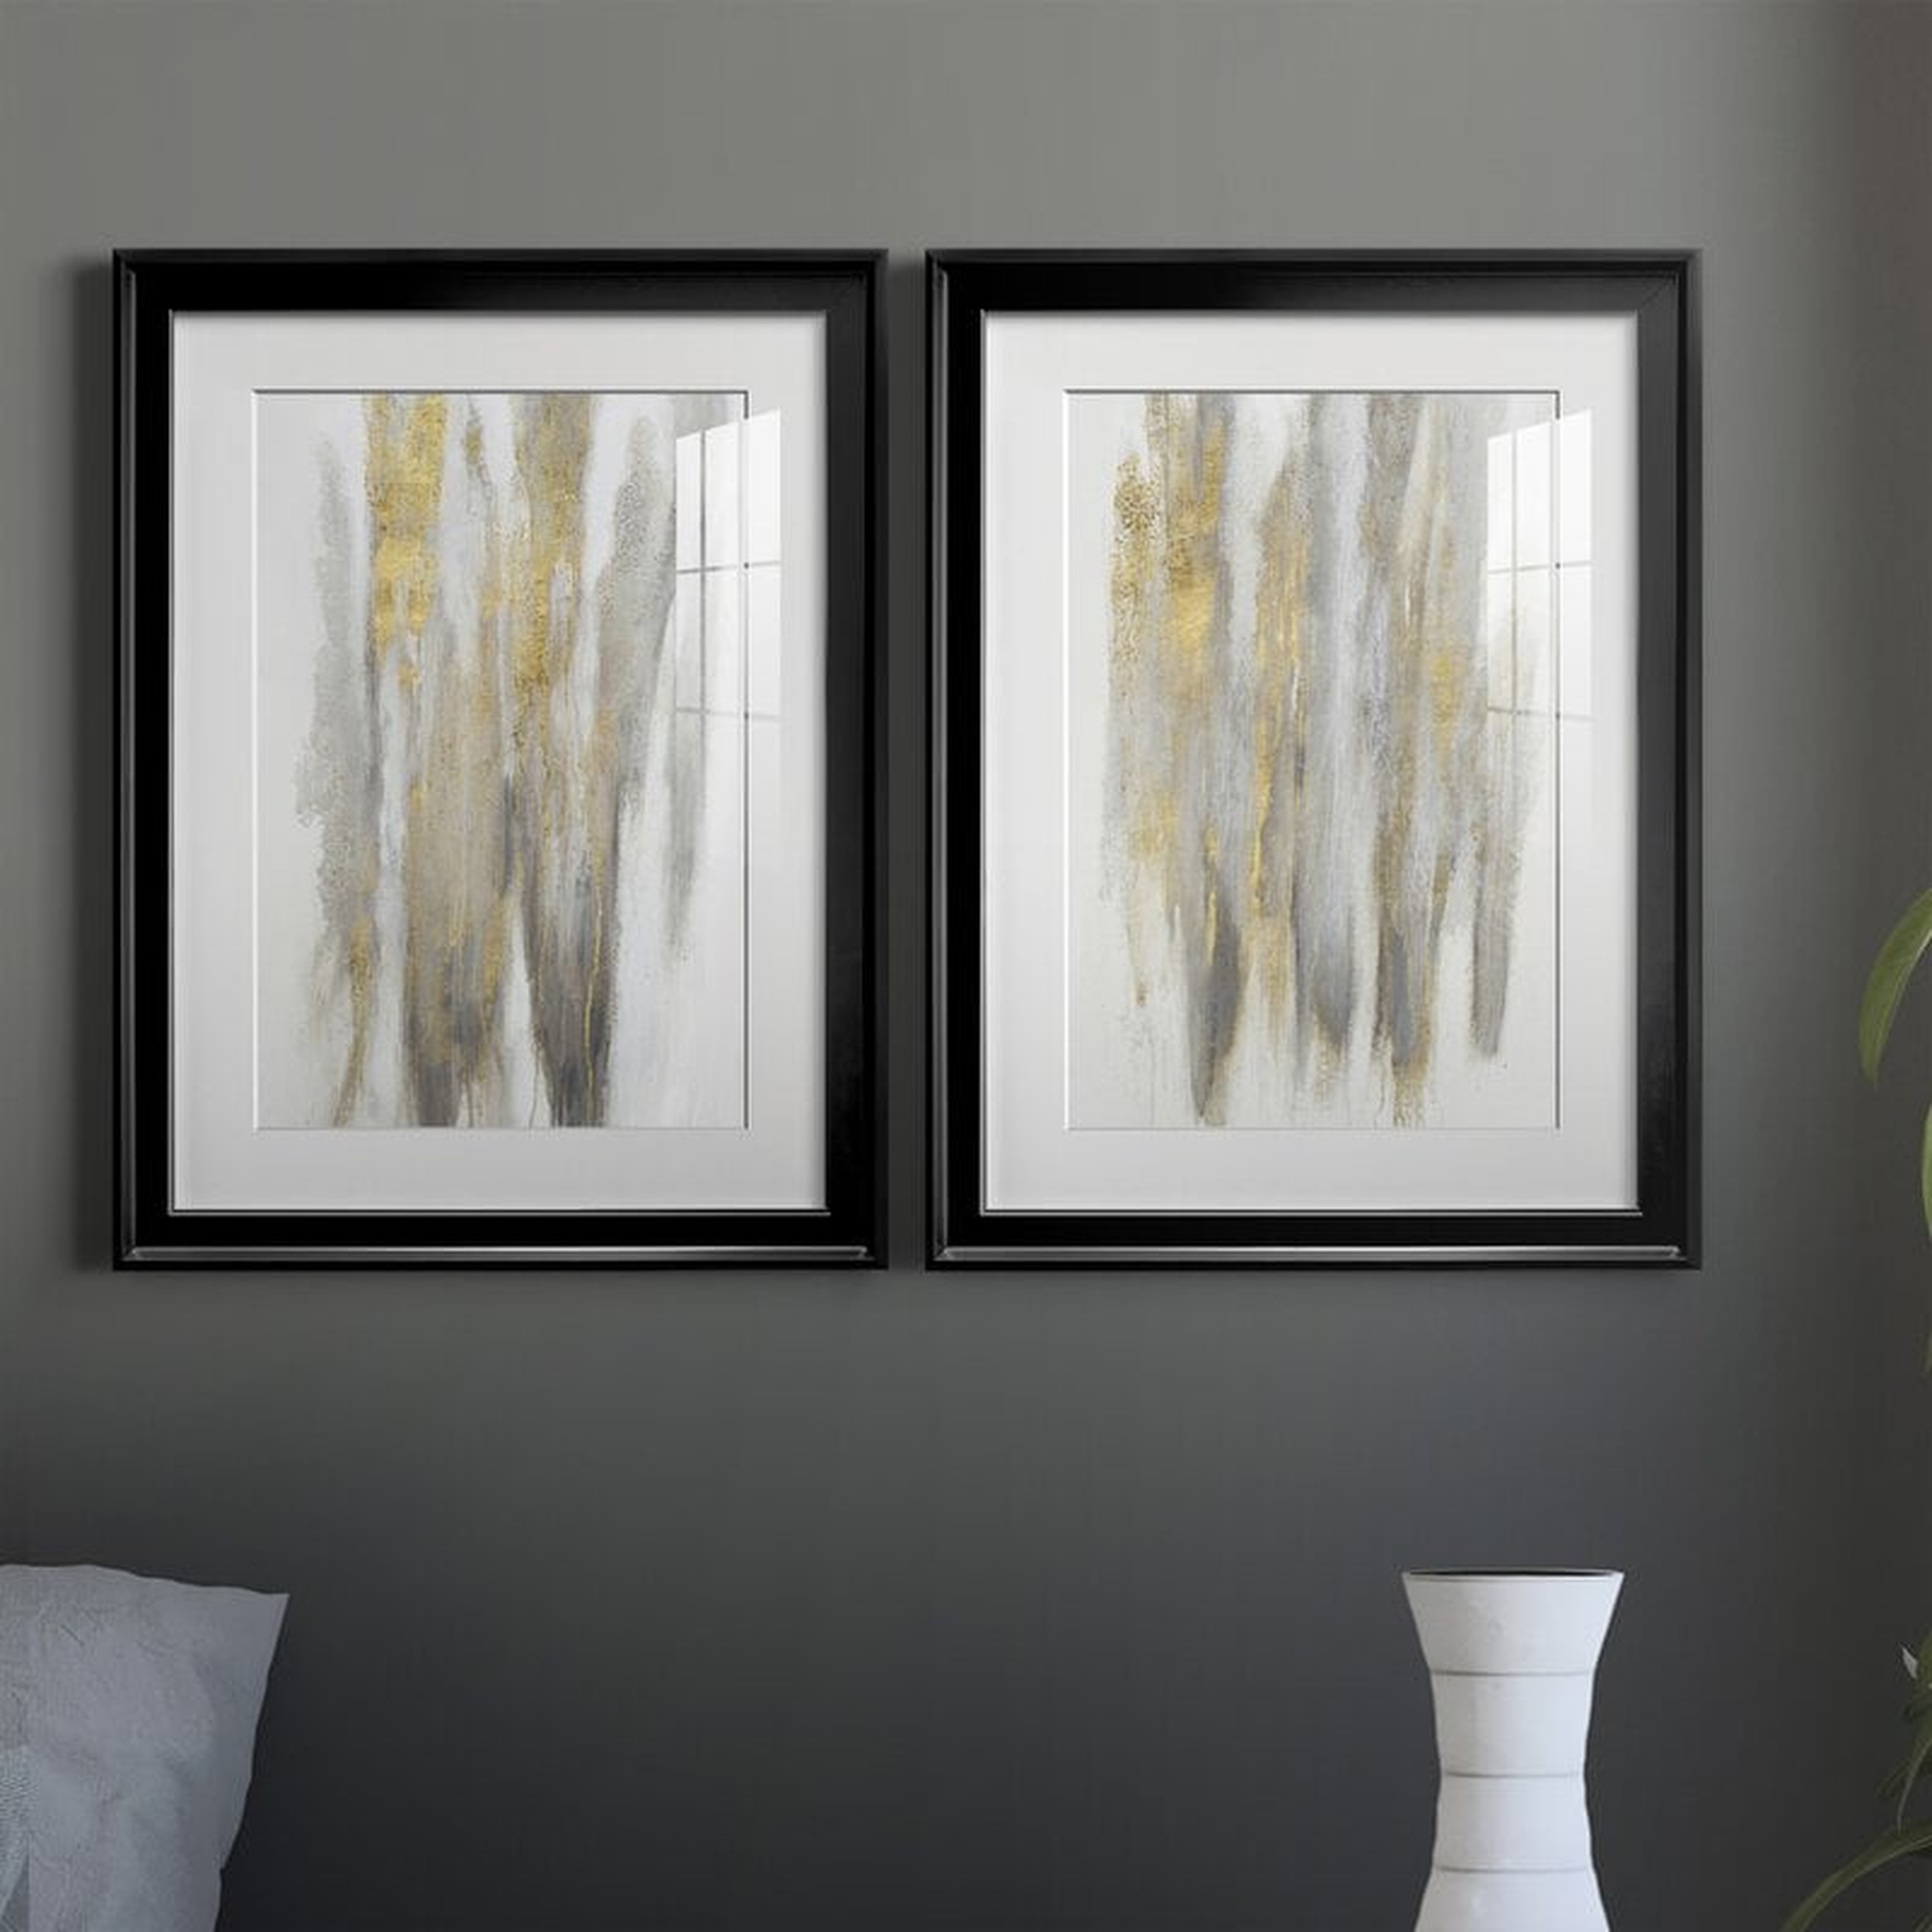 Free-Flowing I - 2 Piece Picture Frame Graphic Art Set  Free-Flowing I - 2 Piece Picture Frame Graphic Art Set  Free-Flowing I - 2 Piece Picture Frame Graphic Art Set  Free-Flowing I - 2 Piece Picture Frame Graphic Art Set  Free-Flowing I - 2 Piece Pictur - Wayfair